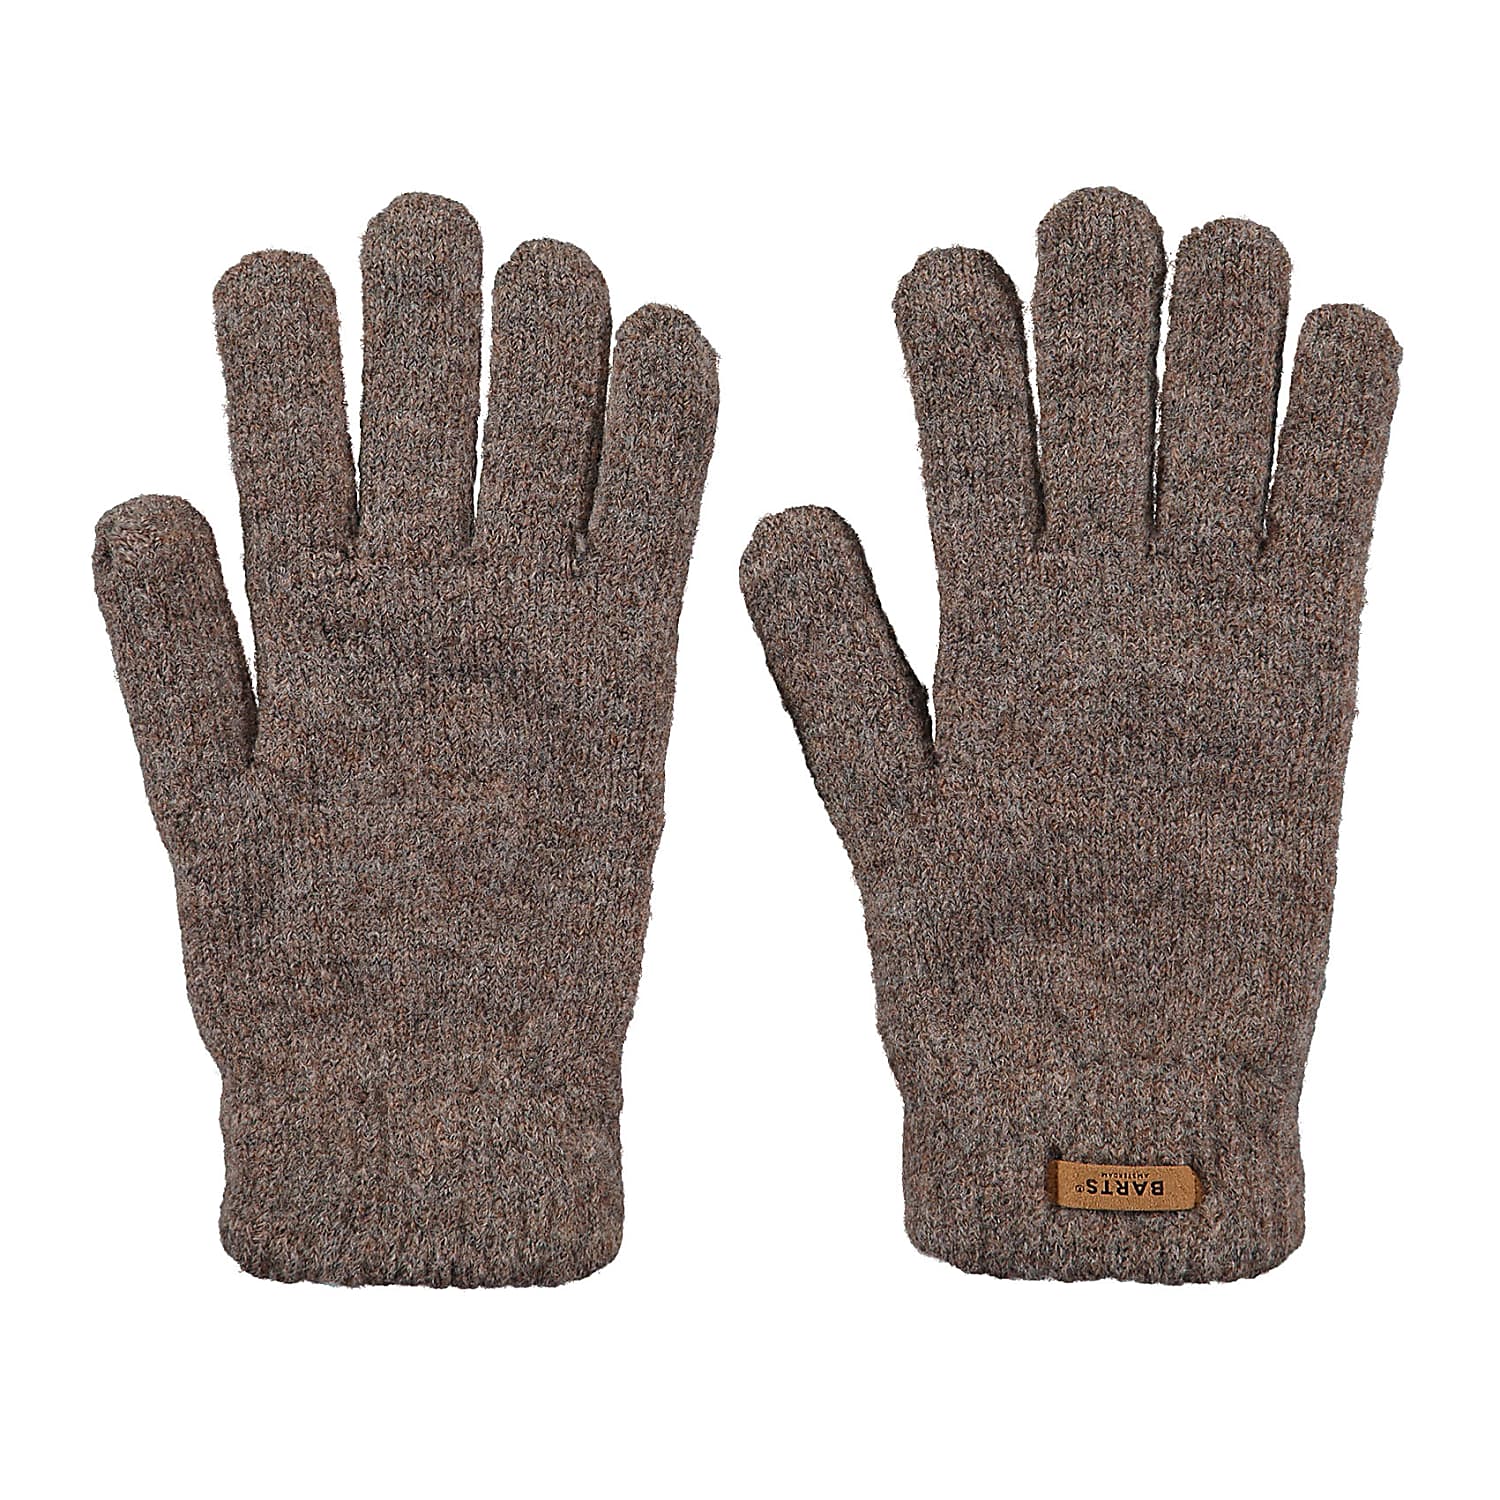 Barts W WITZIA GLOVES, Brown and Fast - shipping cheap